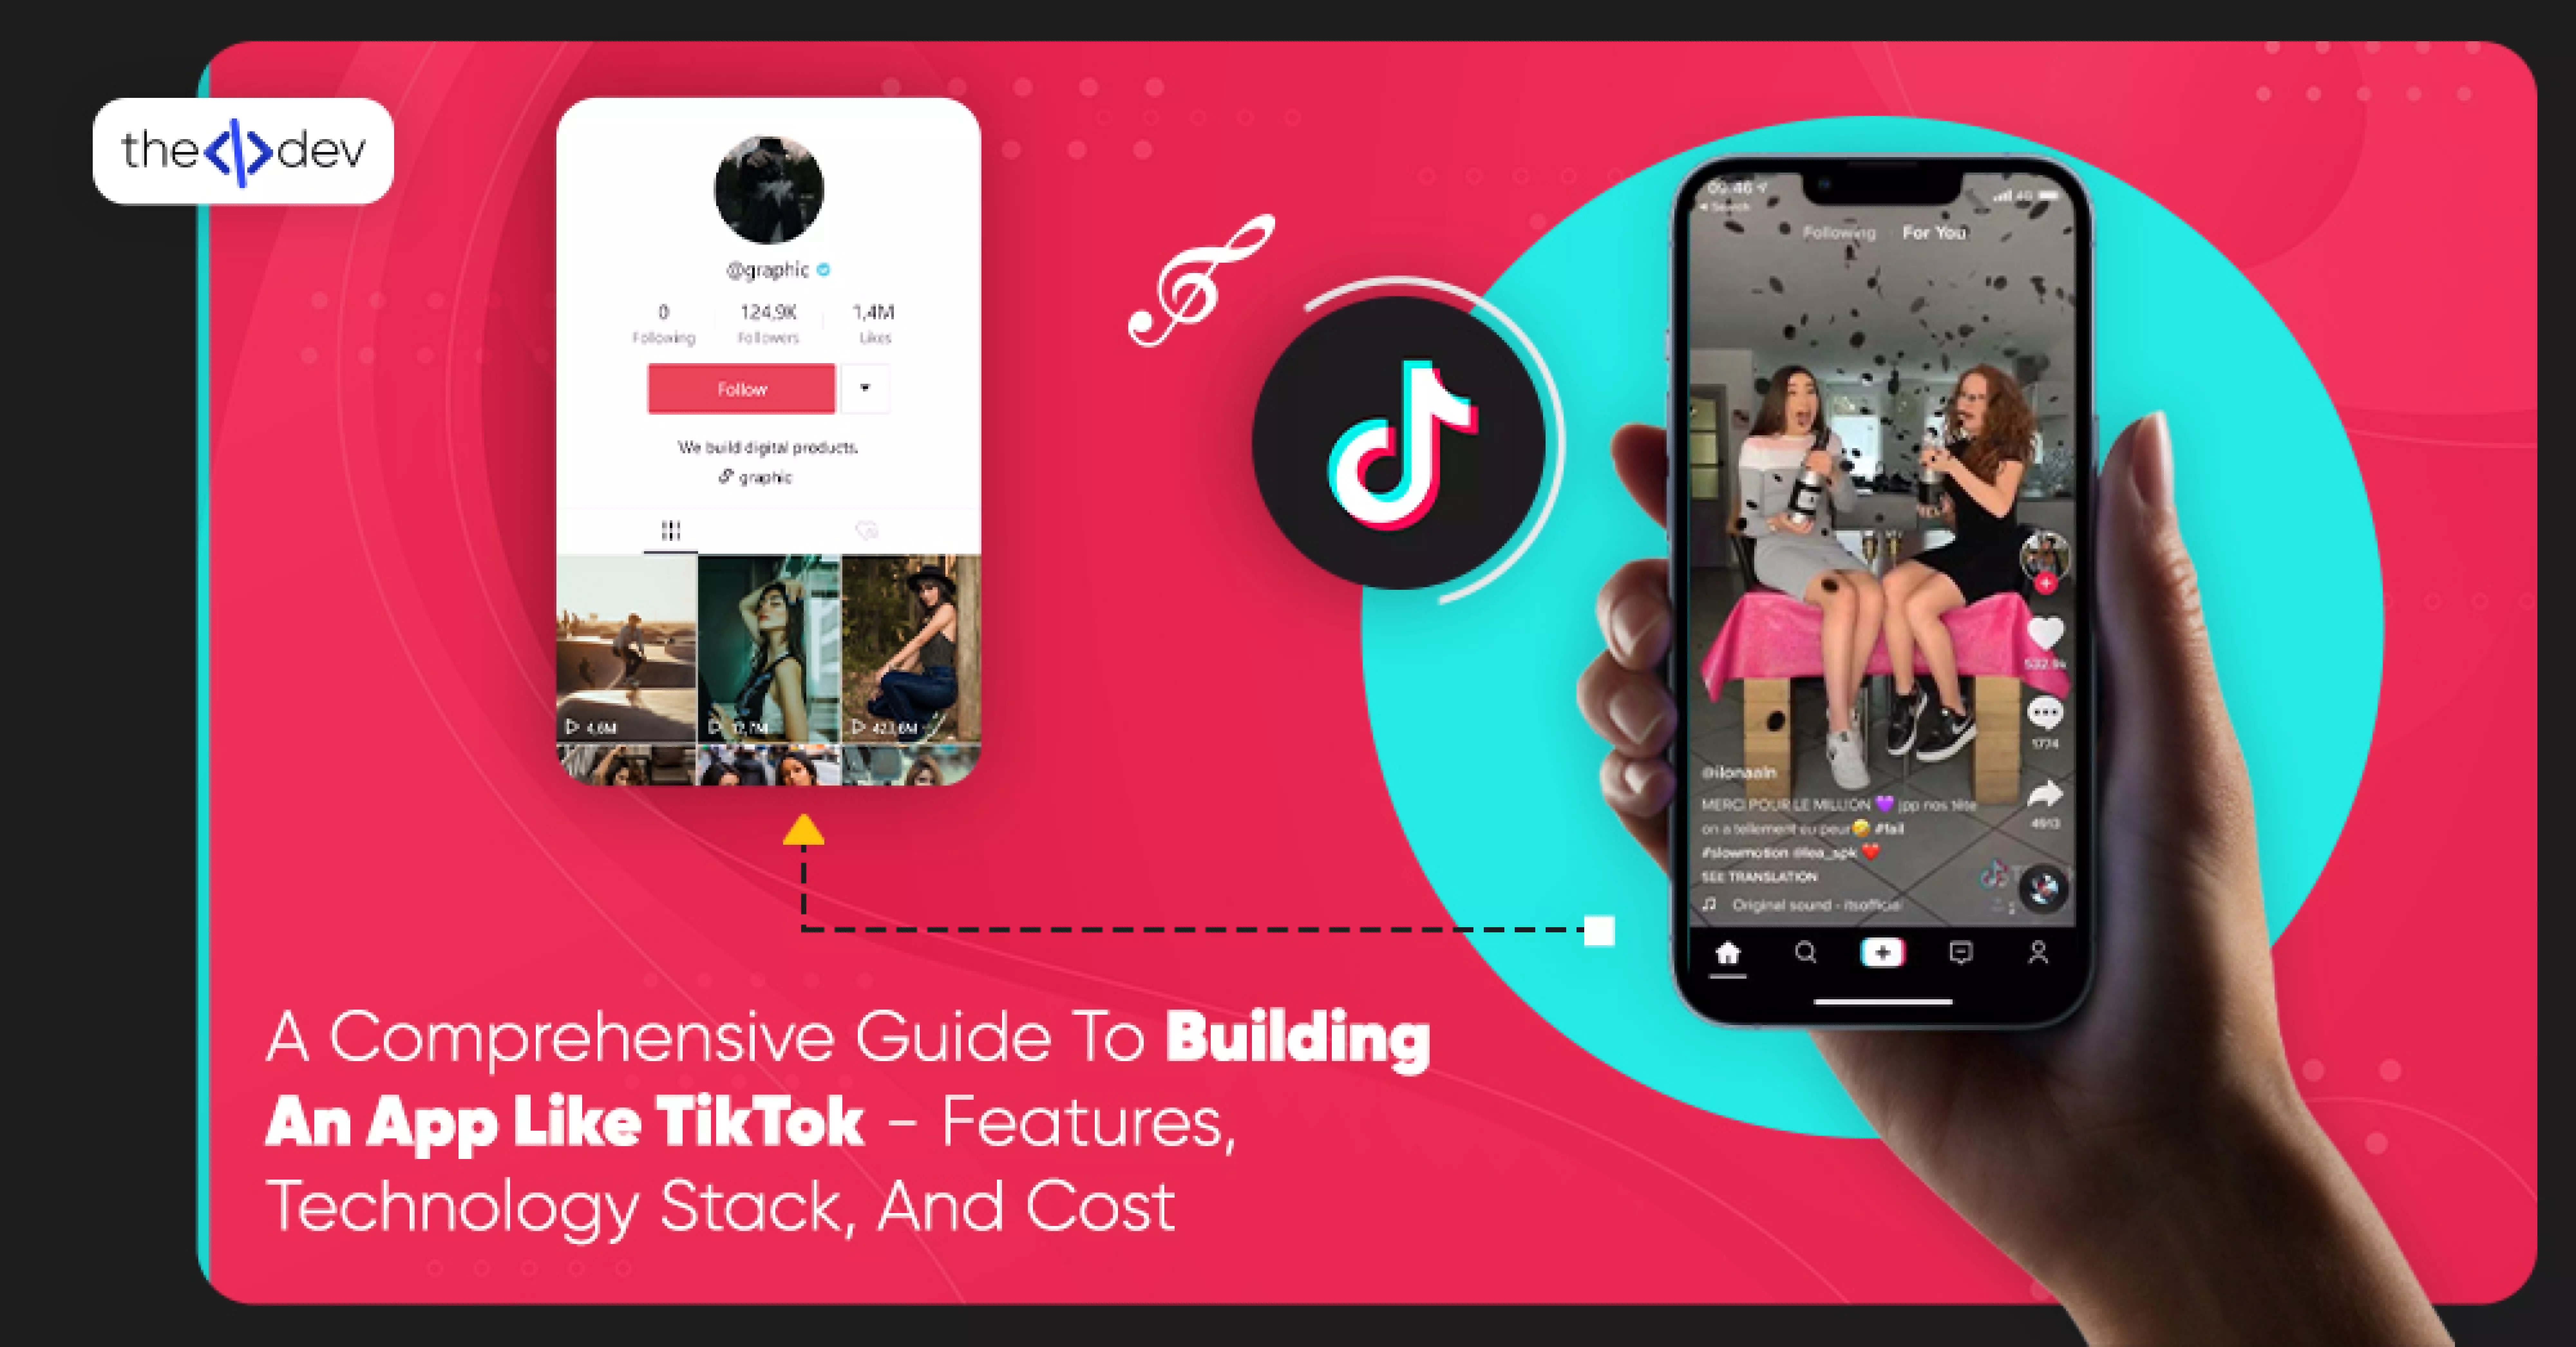 A Comprehensive Guide To Building an App Like TikTok - Features, Technology